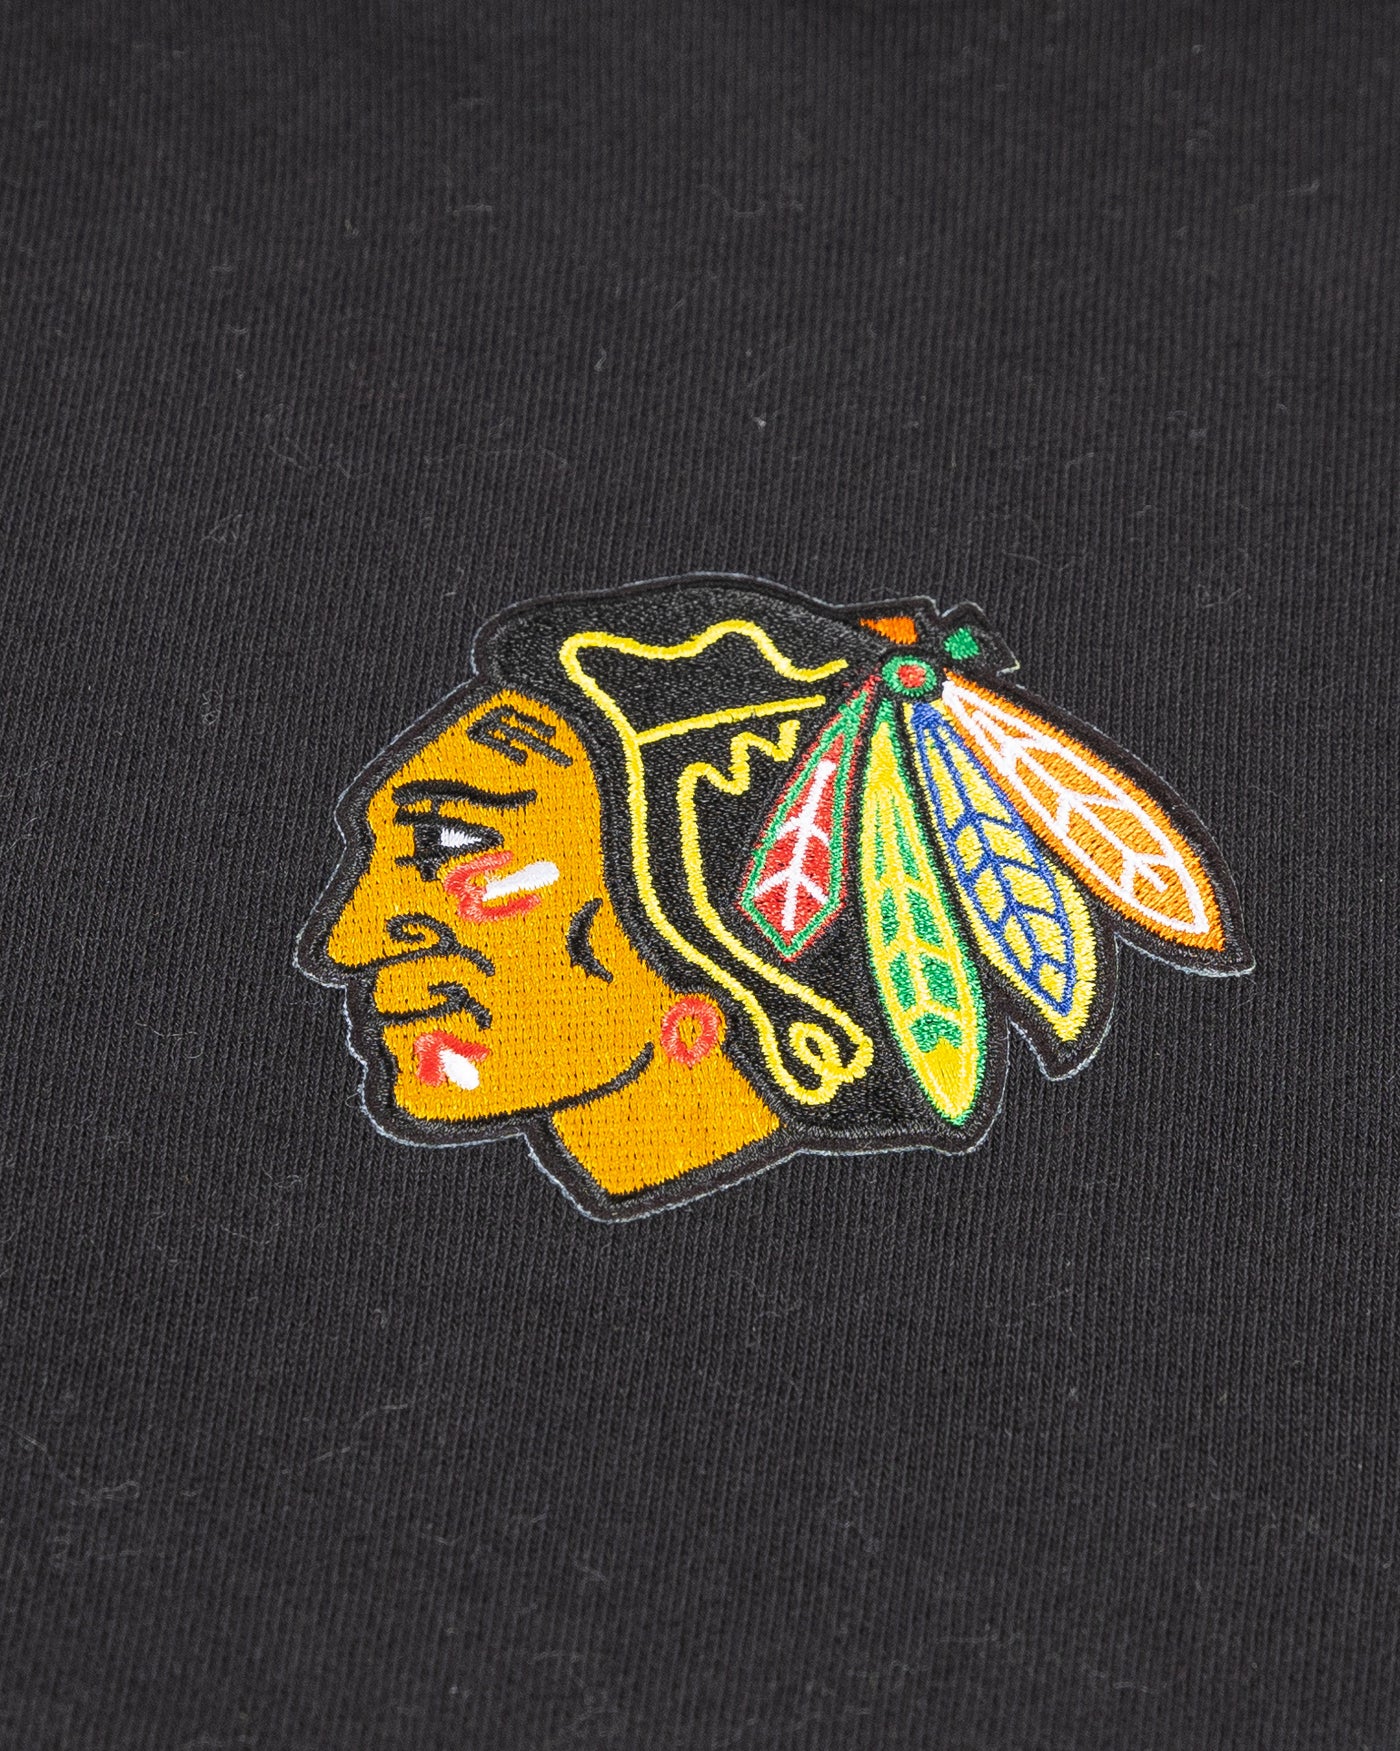 black Sportiqe quarter zip with Chicago Blackhawks primary logo embroidered on left chest - detail lay flat